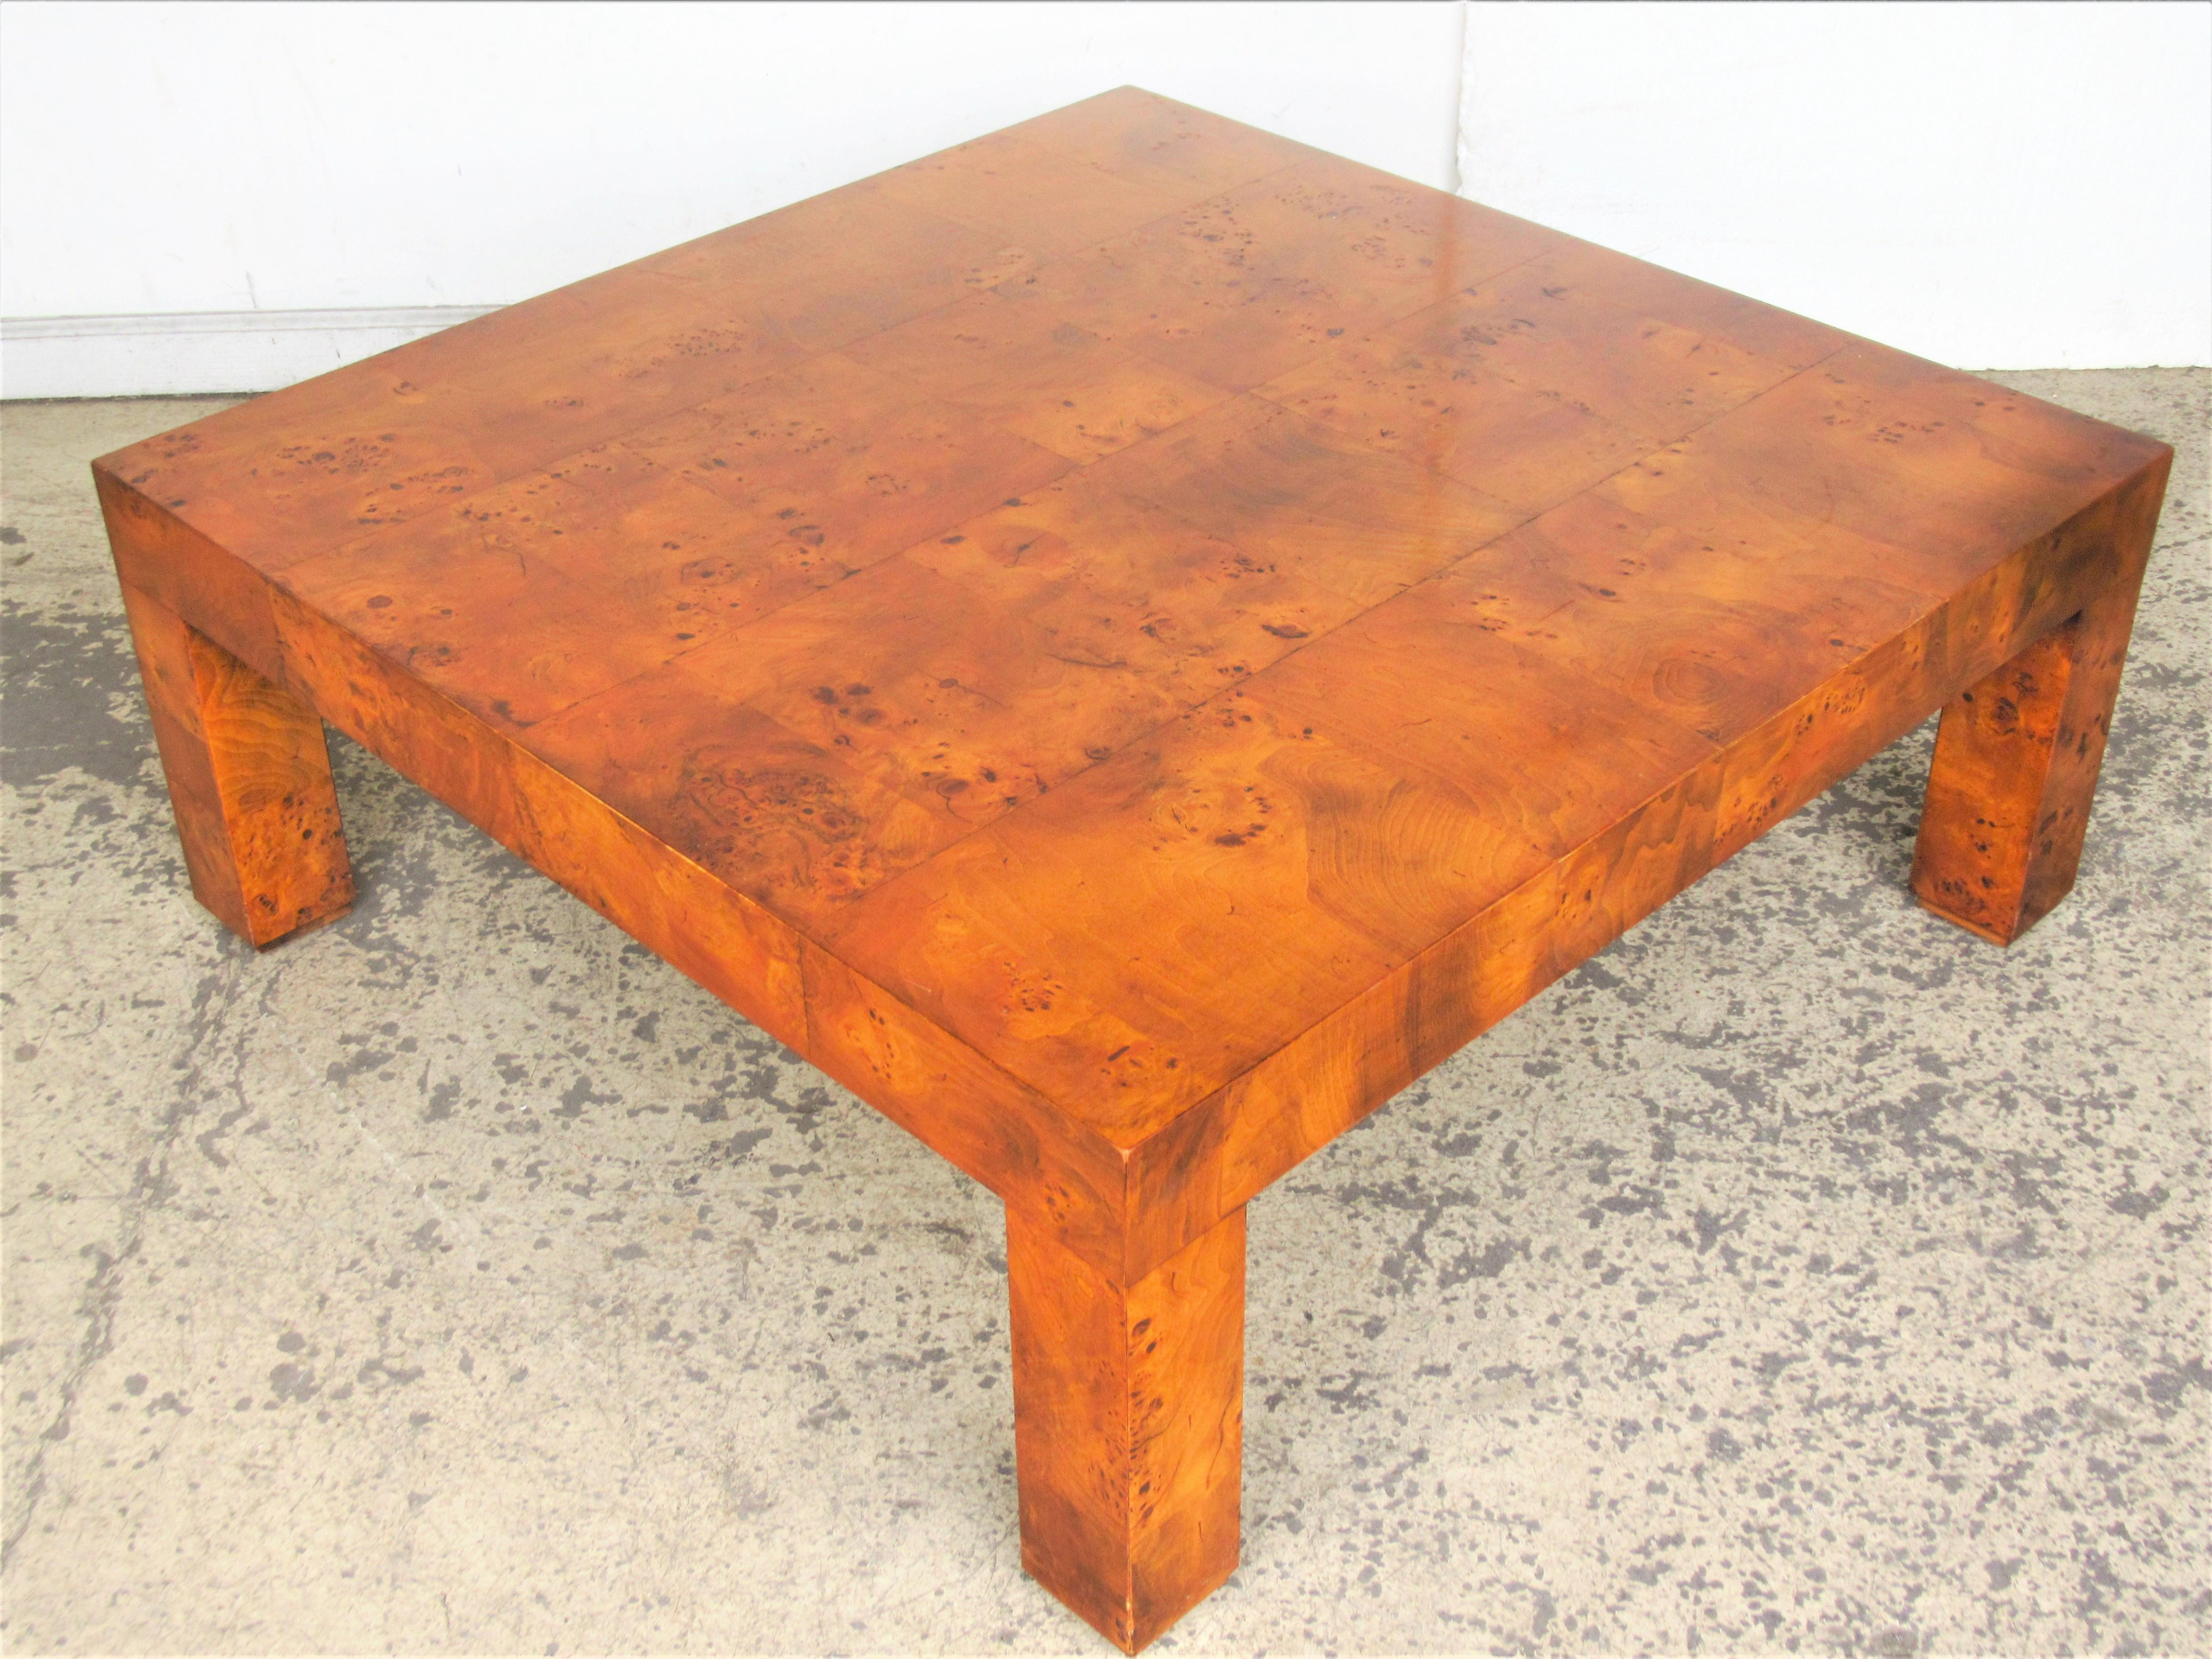 Patchwork burl veneer Parsons style coffee table by Milo Baughman in beautifully aged original glowing surface color, circa 1970. Measures: 39 inches square by 15 inches high. Look at all pictures and read condition report in comment section.